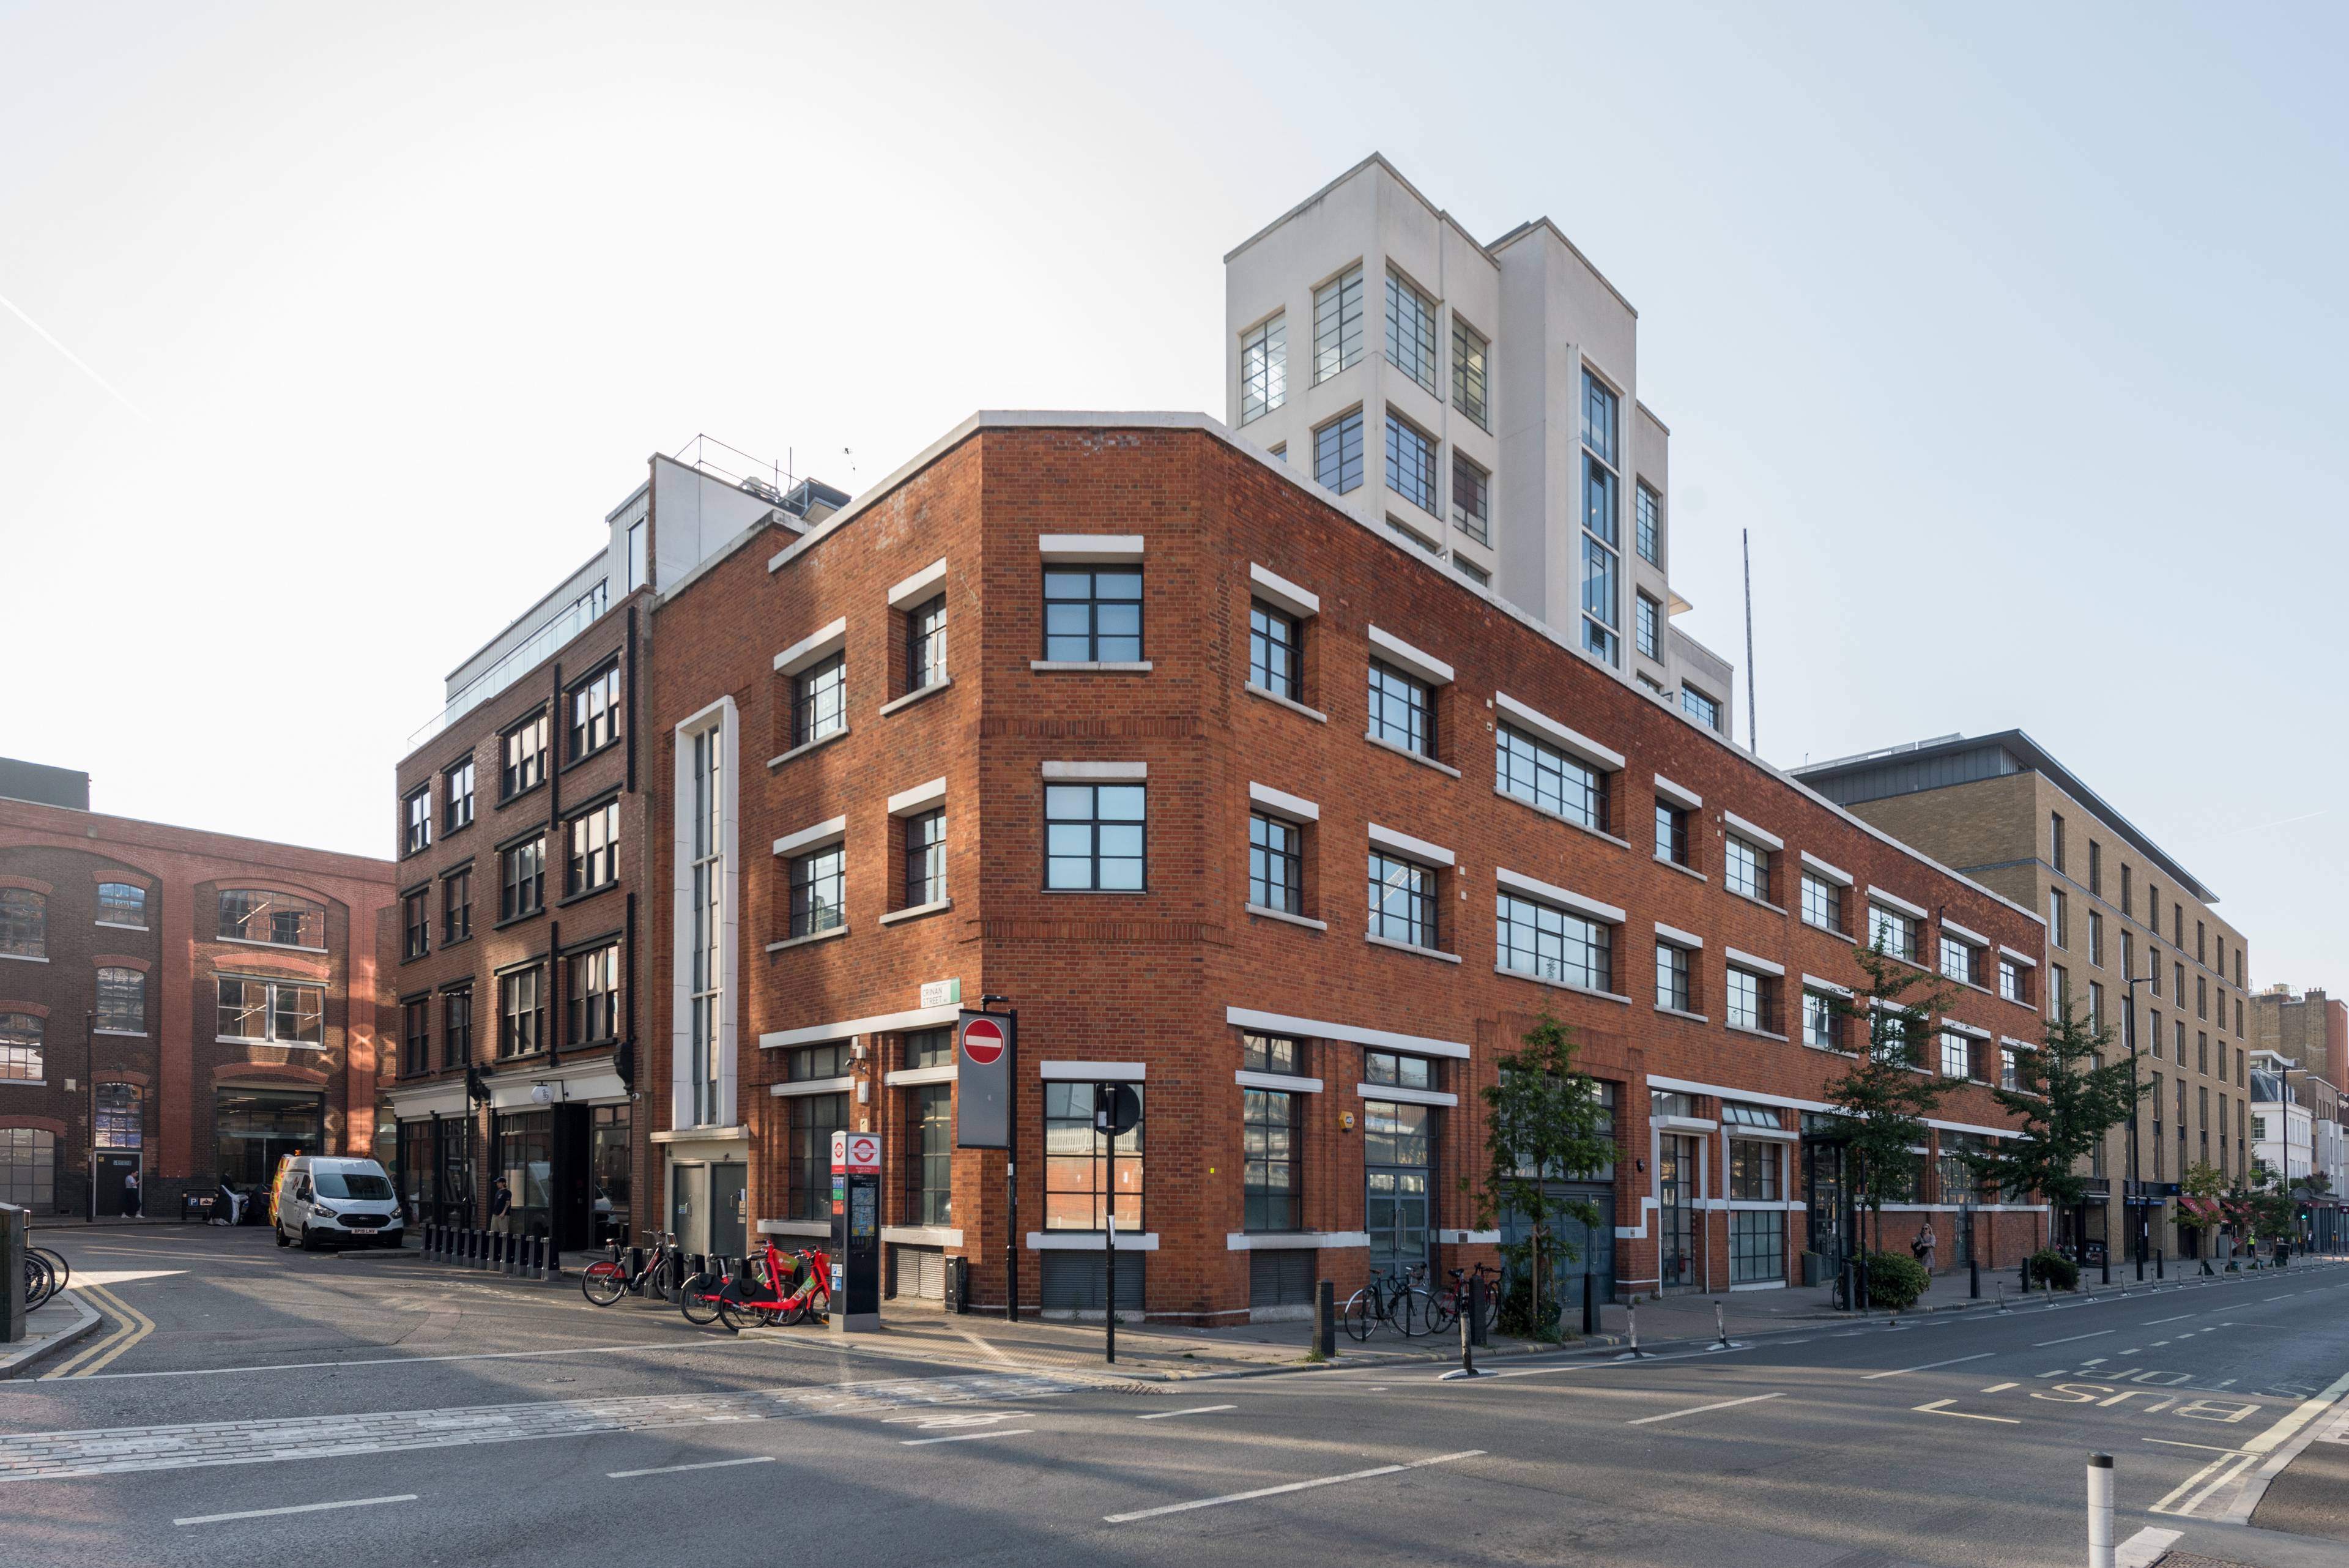 An Outstanding Deal At £1100 per sq/ft An Iconic King’s Cross Loft Apartment.